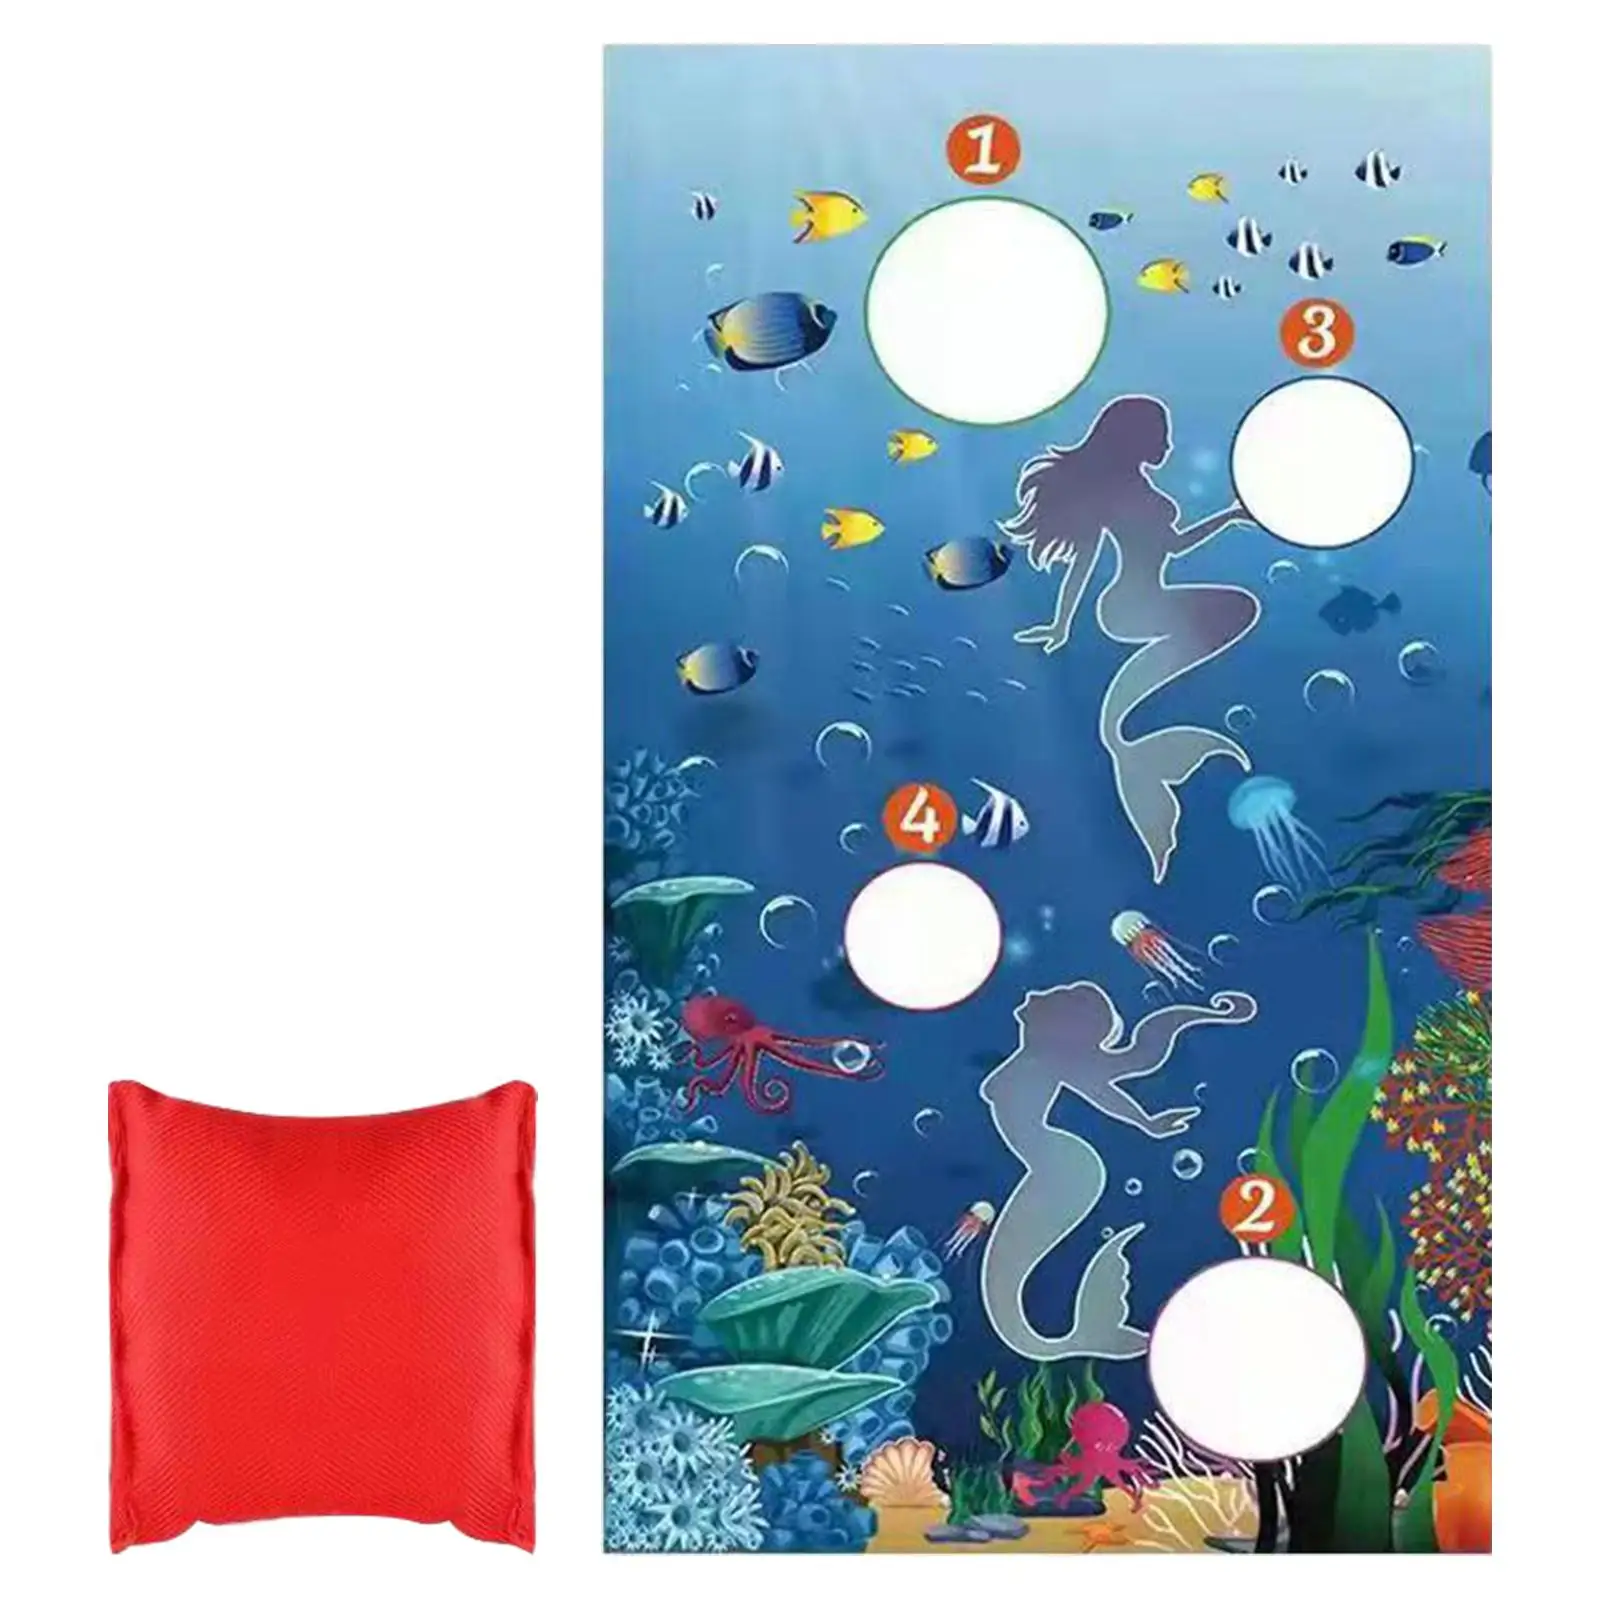 Ocean Theme Sandbag Throw Game 30x53 inch Large Throwing Game Toy Game Toss Toss Game Banner for Kids Activity Outdoor Toy Gift